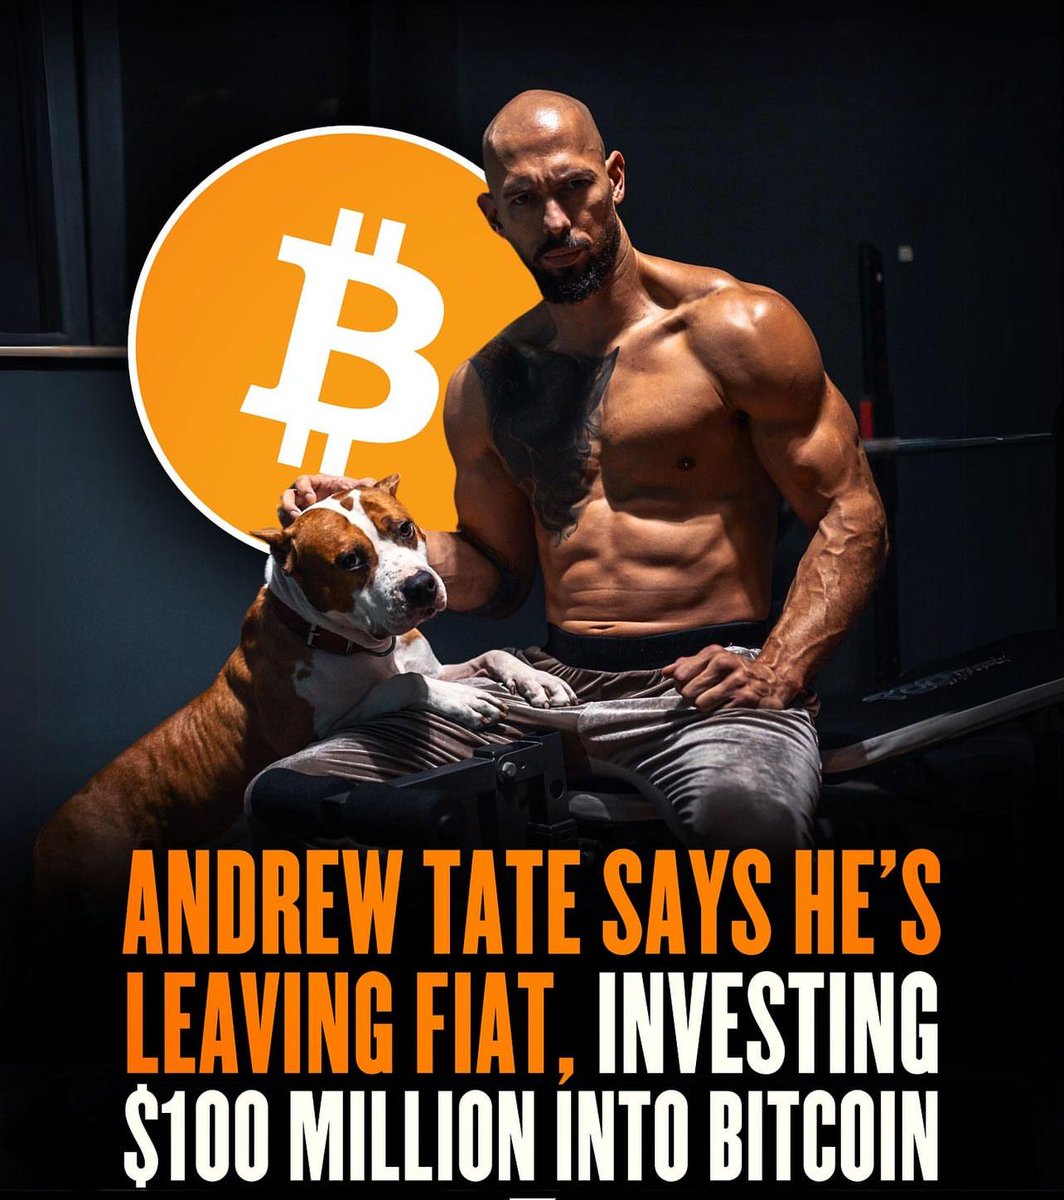 Andrew Tate announces departure from fiat, allocating $100 million into Bitcoin investments.

#AndrewTate #BitcoinInvestment #Cryptocurrency #FiatExit